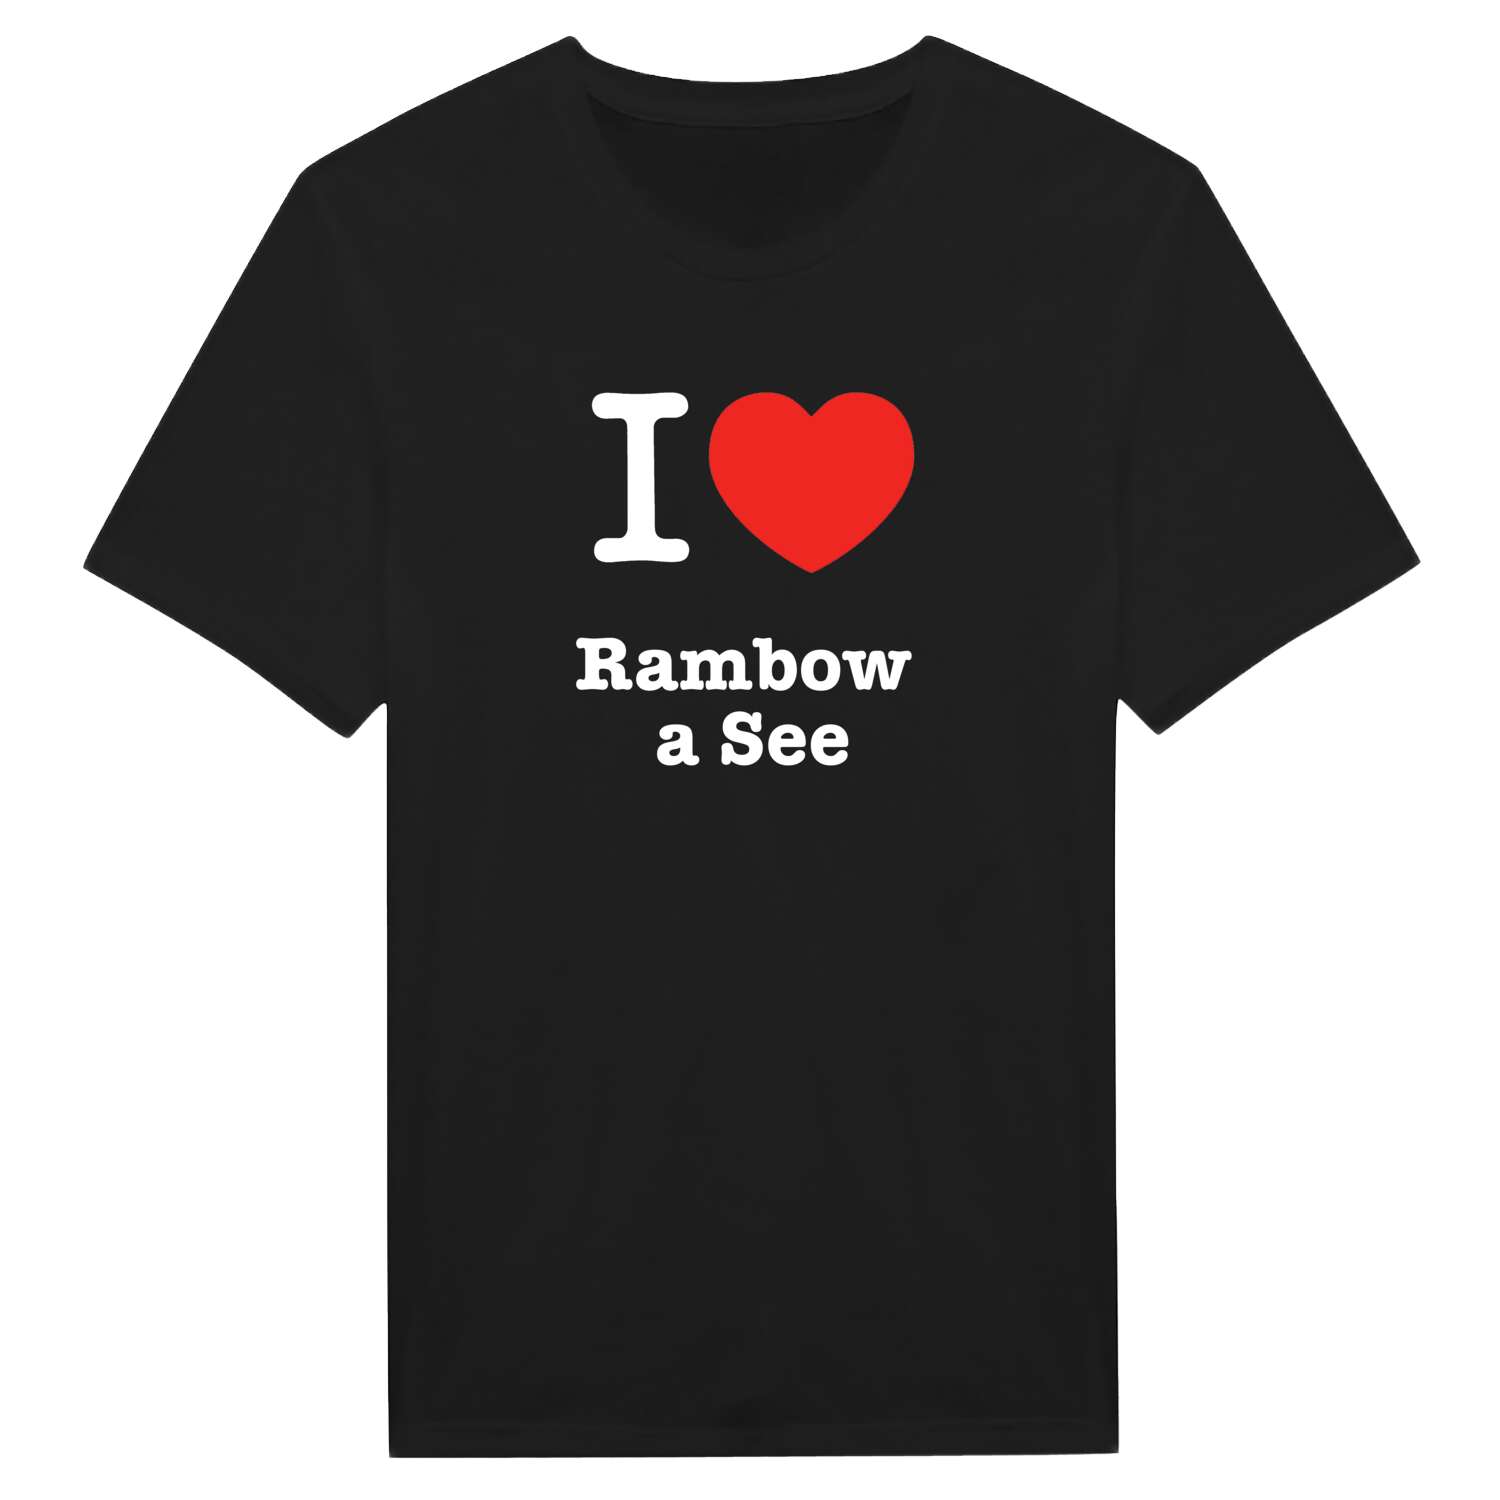 Rambow a See T-Shirt »I love«